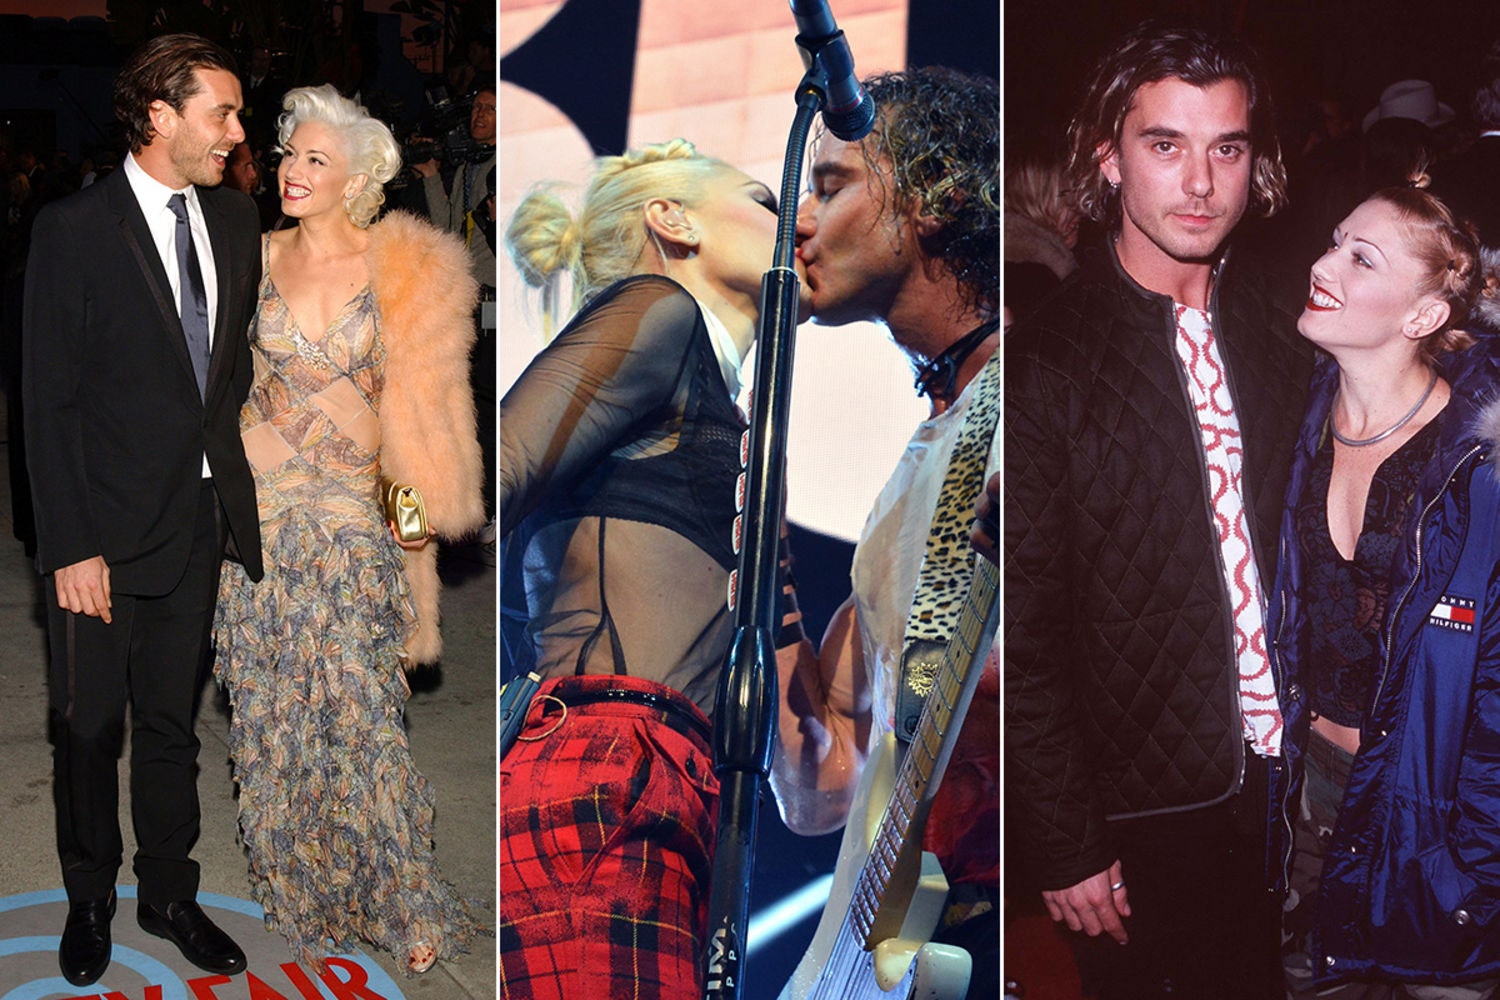 Gavin Rossdale and Gwen Stefani Photo: 14 Times They Were So In Love